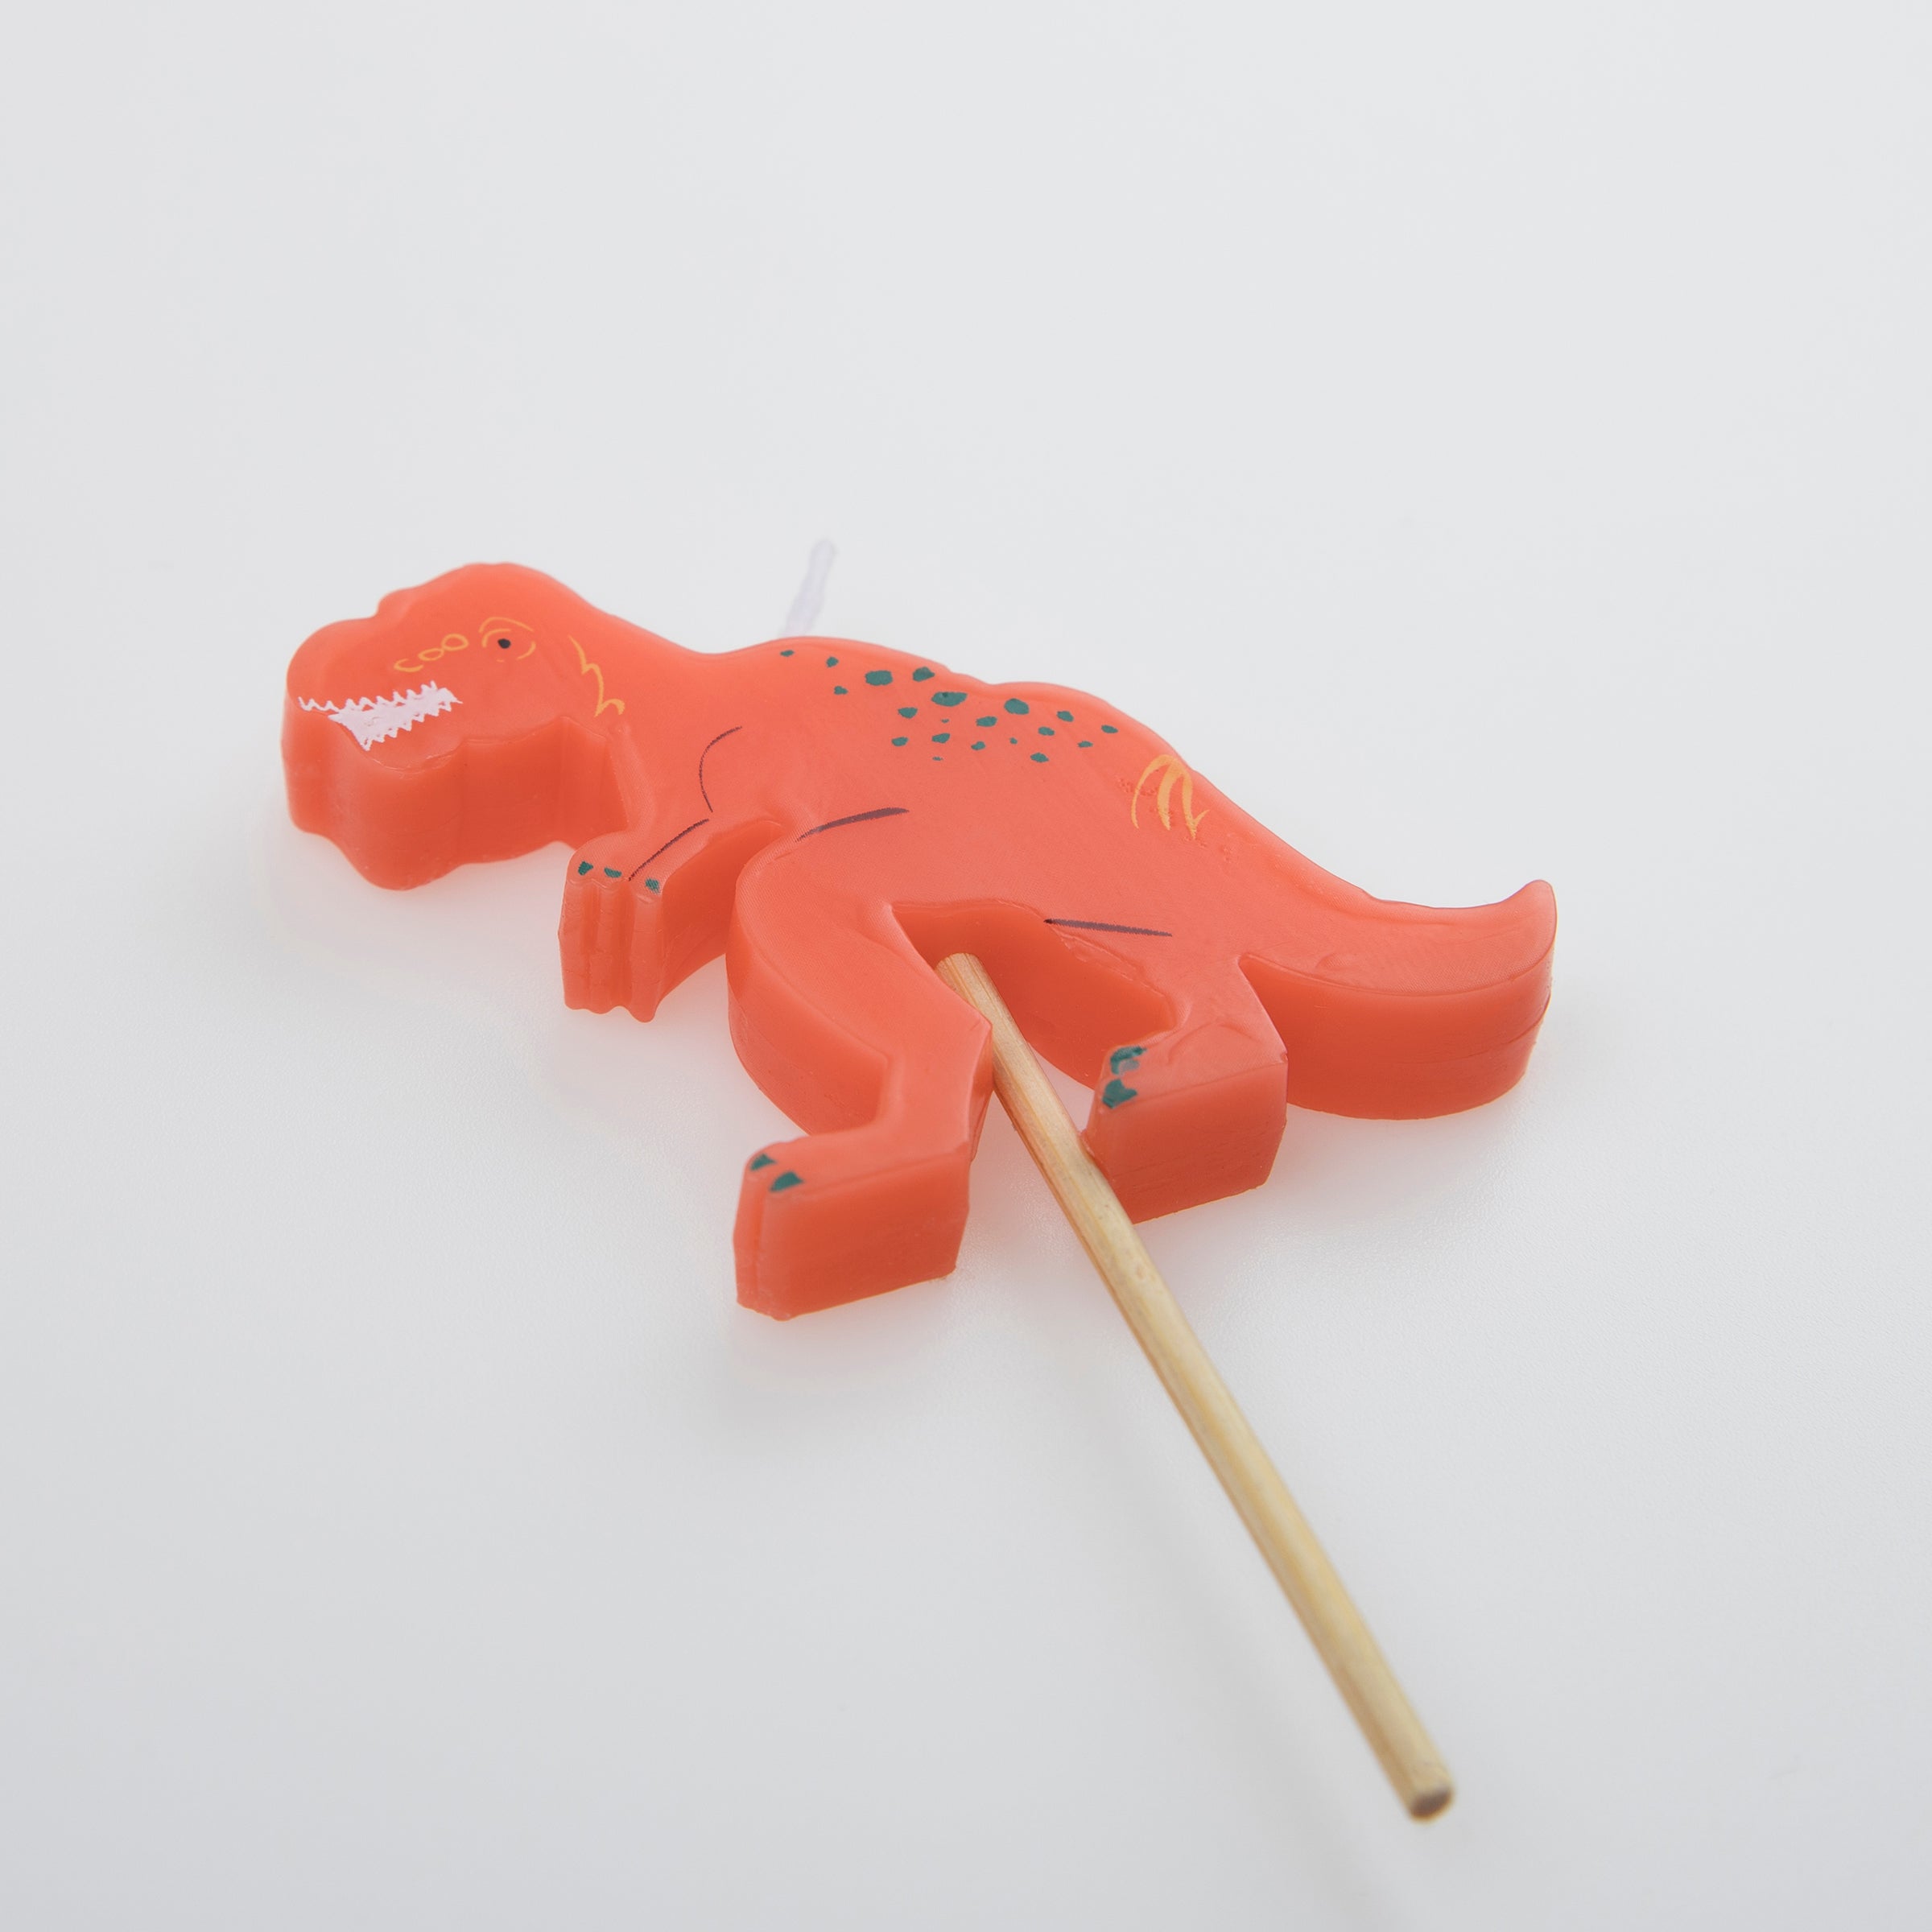 Our dinosaur candles will make your dinosaur cake look amazing.